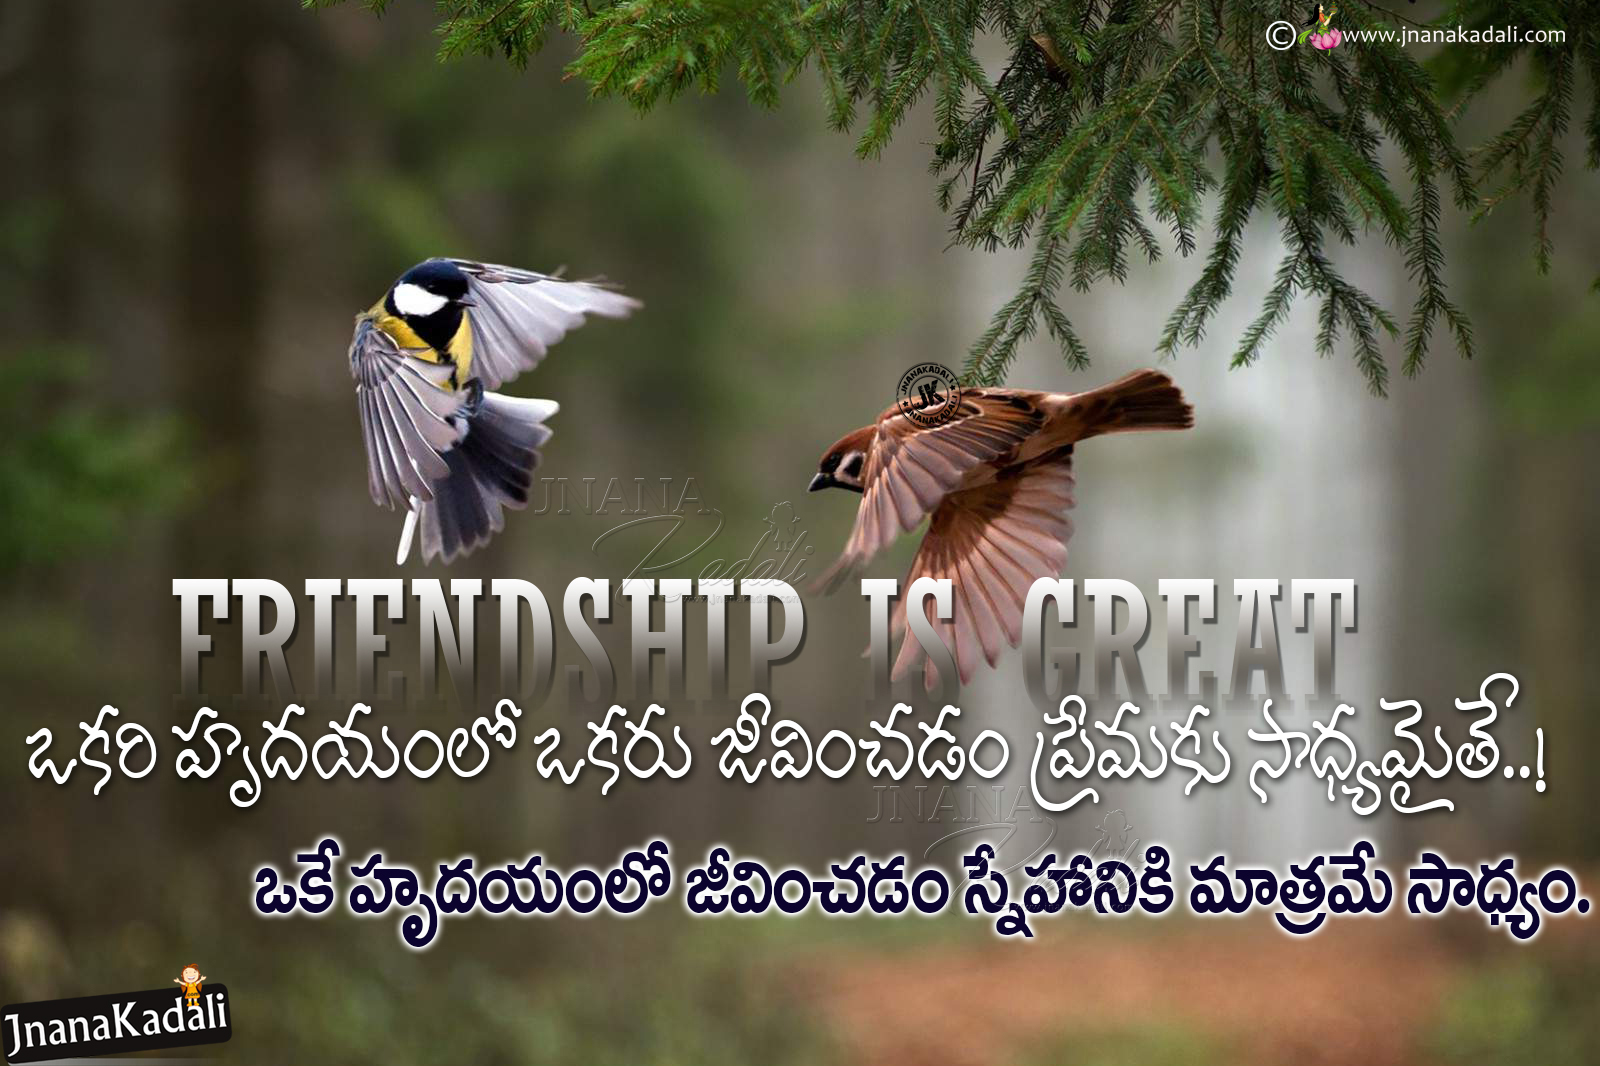 Heart Touching Telugu Friendship Quotes hd wallpapers Free ...